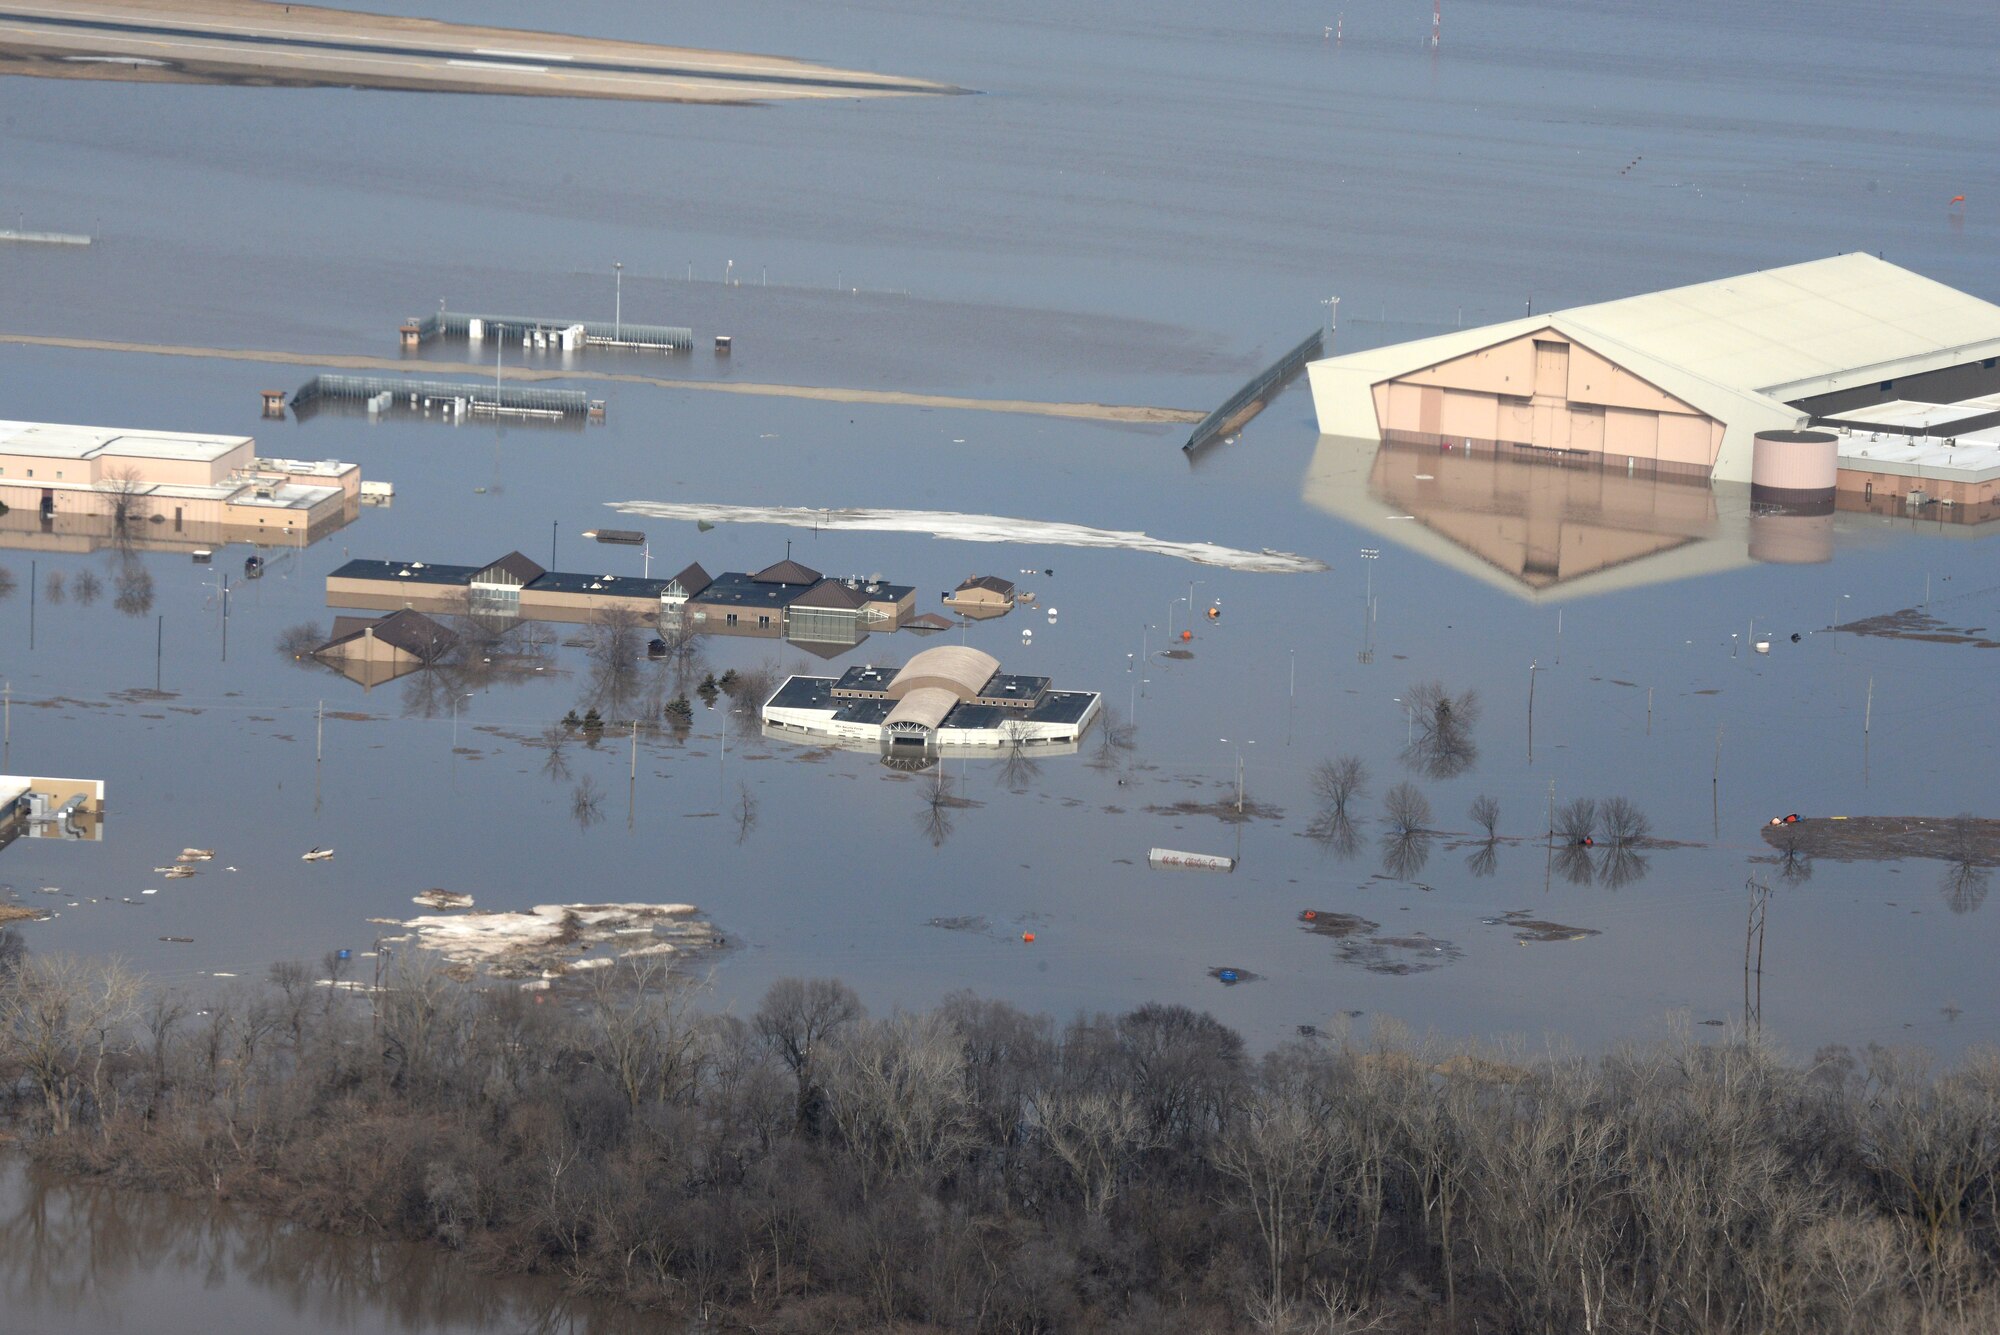 Water covers one-third of Offutt Air Force Base, Nebraska, after the Missouri River flooded in March 2019. AFIMSC cash flowed recovery efforts at Offutt, the October 2018 hurricane at Tyndall AFB, Florida, and the November 2018 earthquake at Joint Base Elmendorf-Richardson, Alaska, in addition to providing funding for border protection at Davis-Monthan AFB, Arizona. (U.S. Air Force photo by Tech. Sgt. Rachelle Blake)